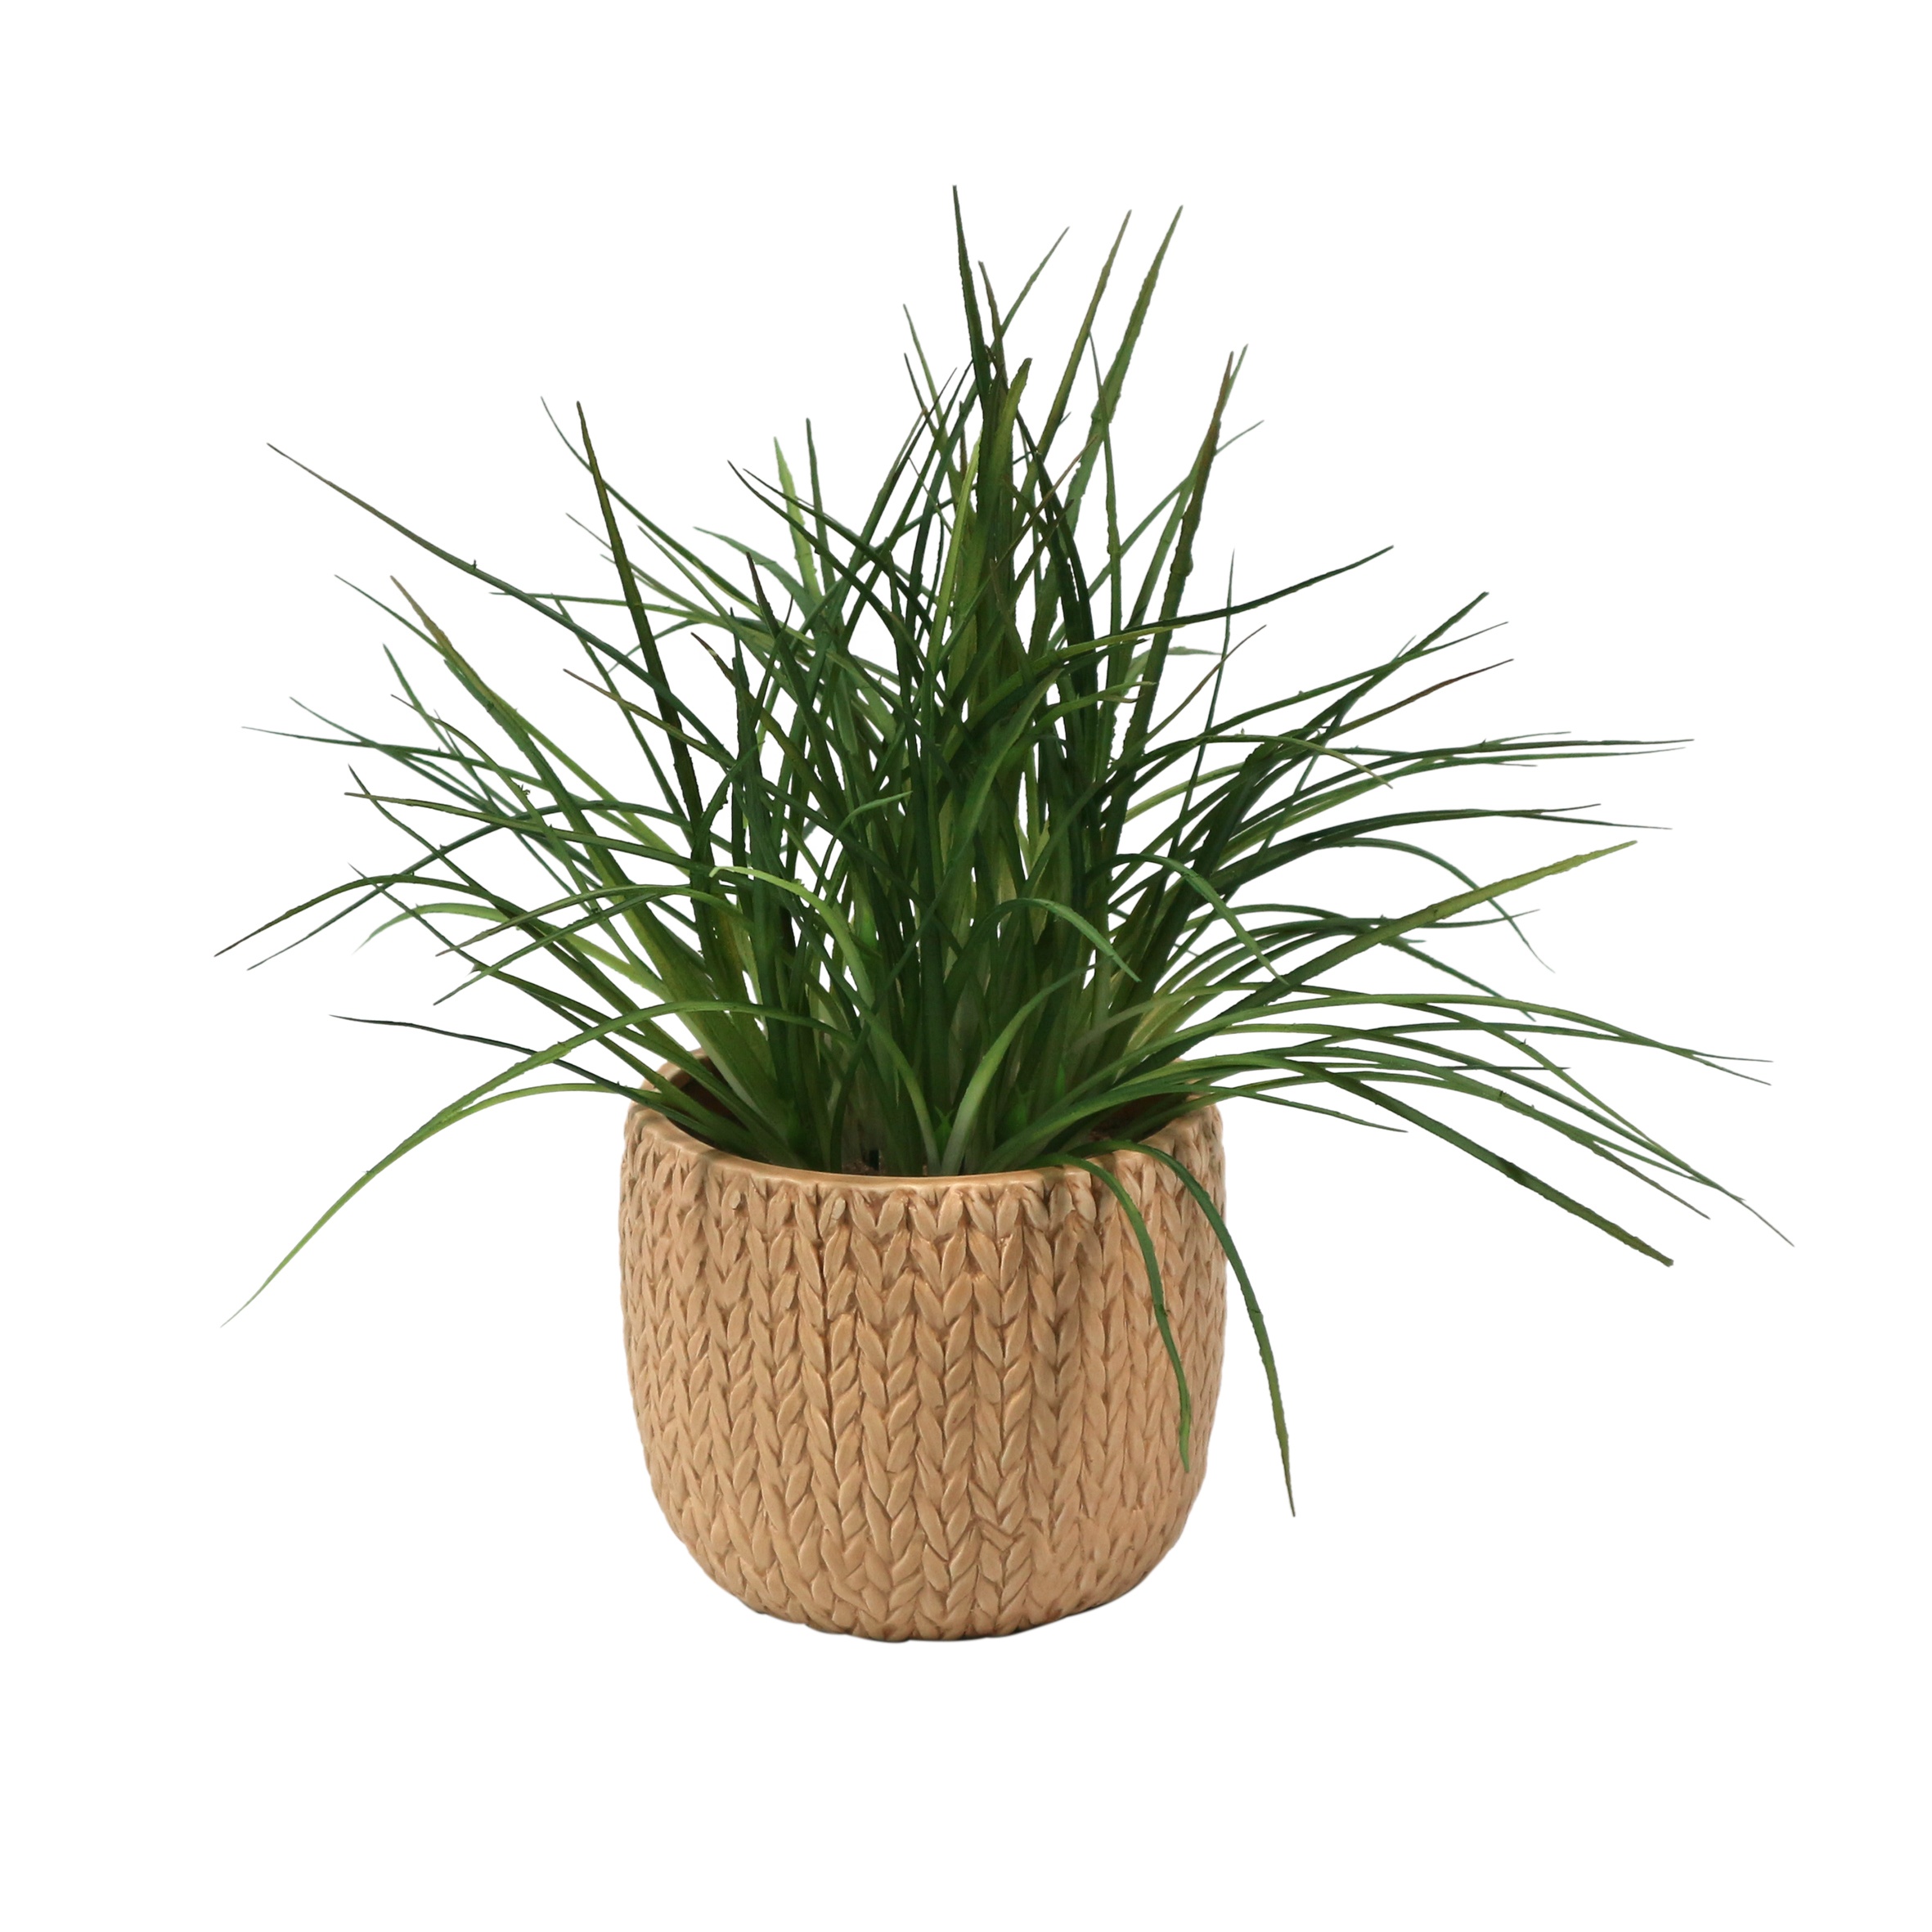 Artificial plant leaves onion grass with ceramic pots for indoor plants decoration